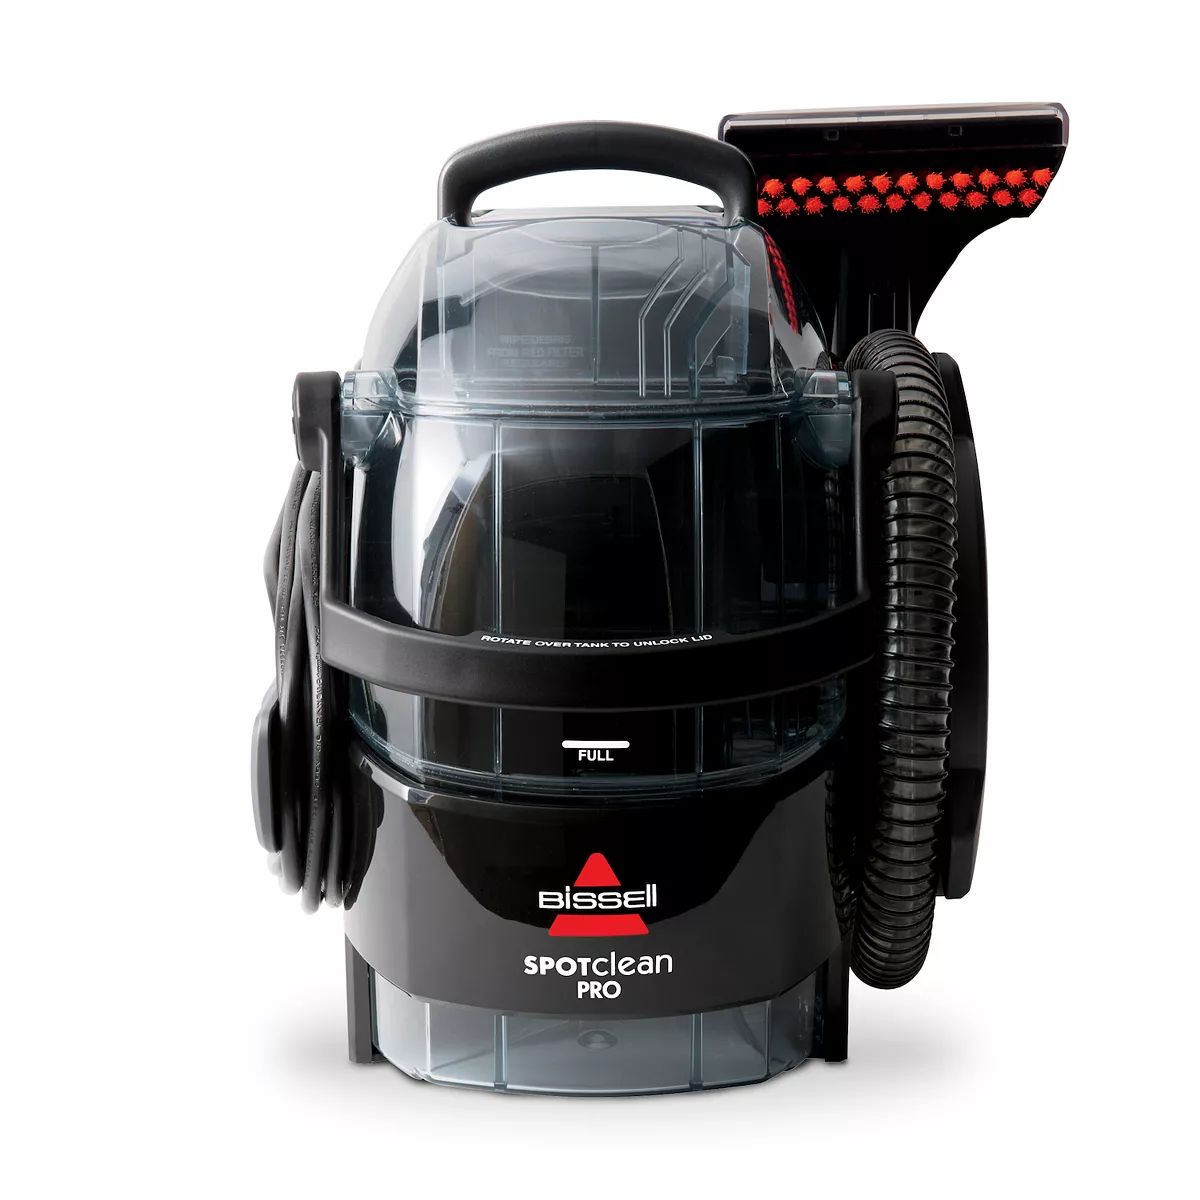 BISSELL SpotClean Pro Portable Deep Cleaner (3624) | Kohl's